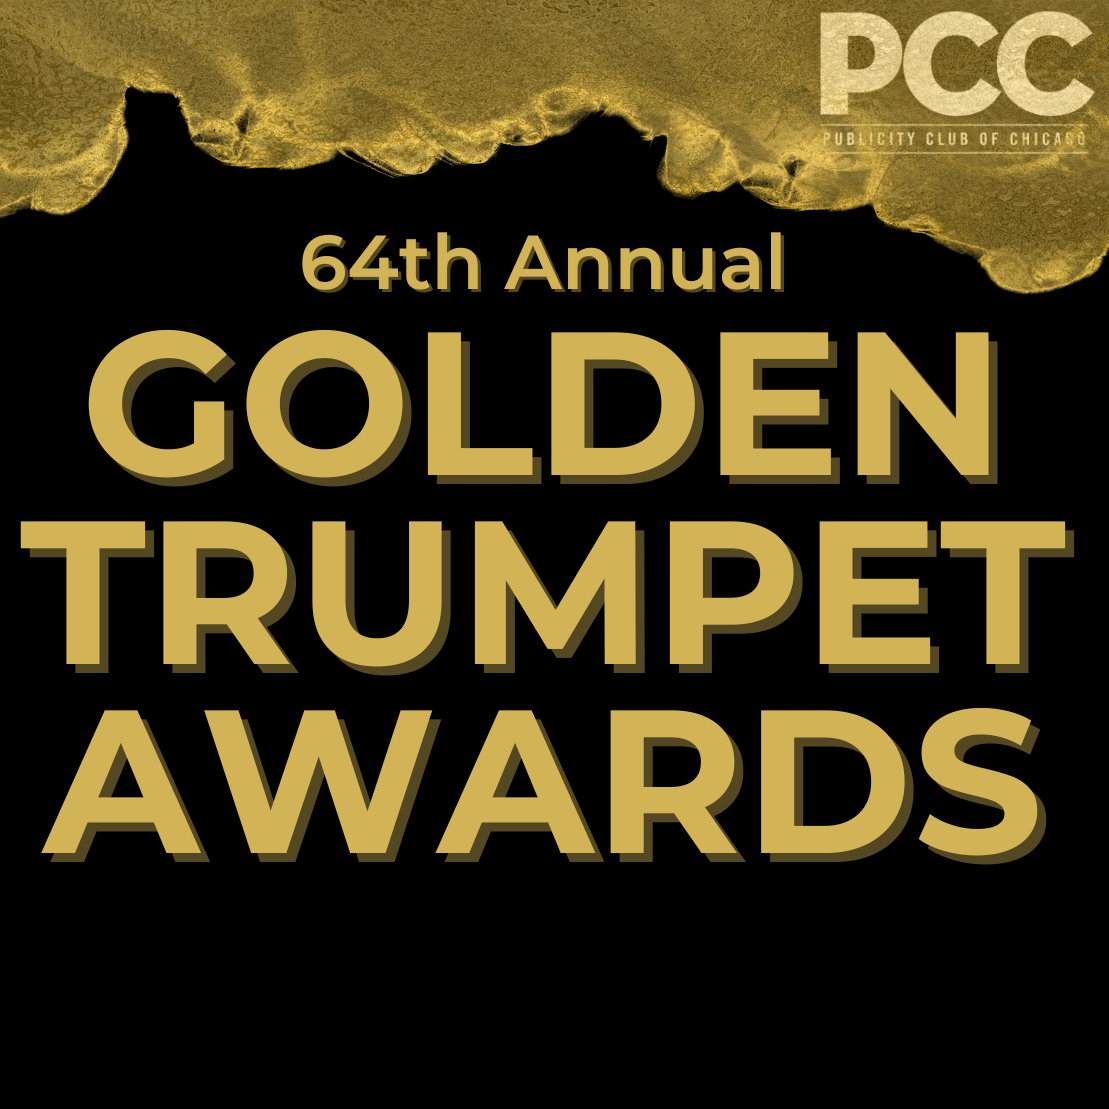 64th Annual Golden Trumpet Awards Winners Publicity Club of Chicago